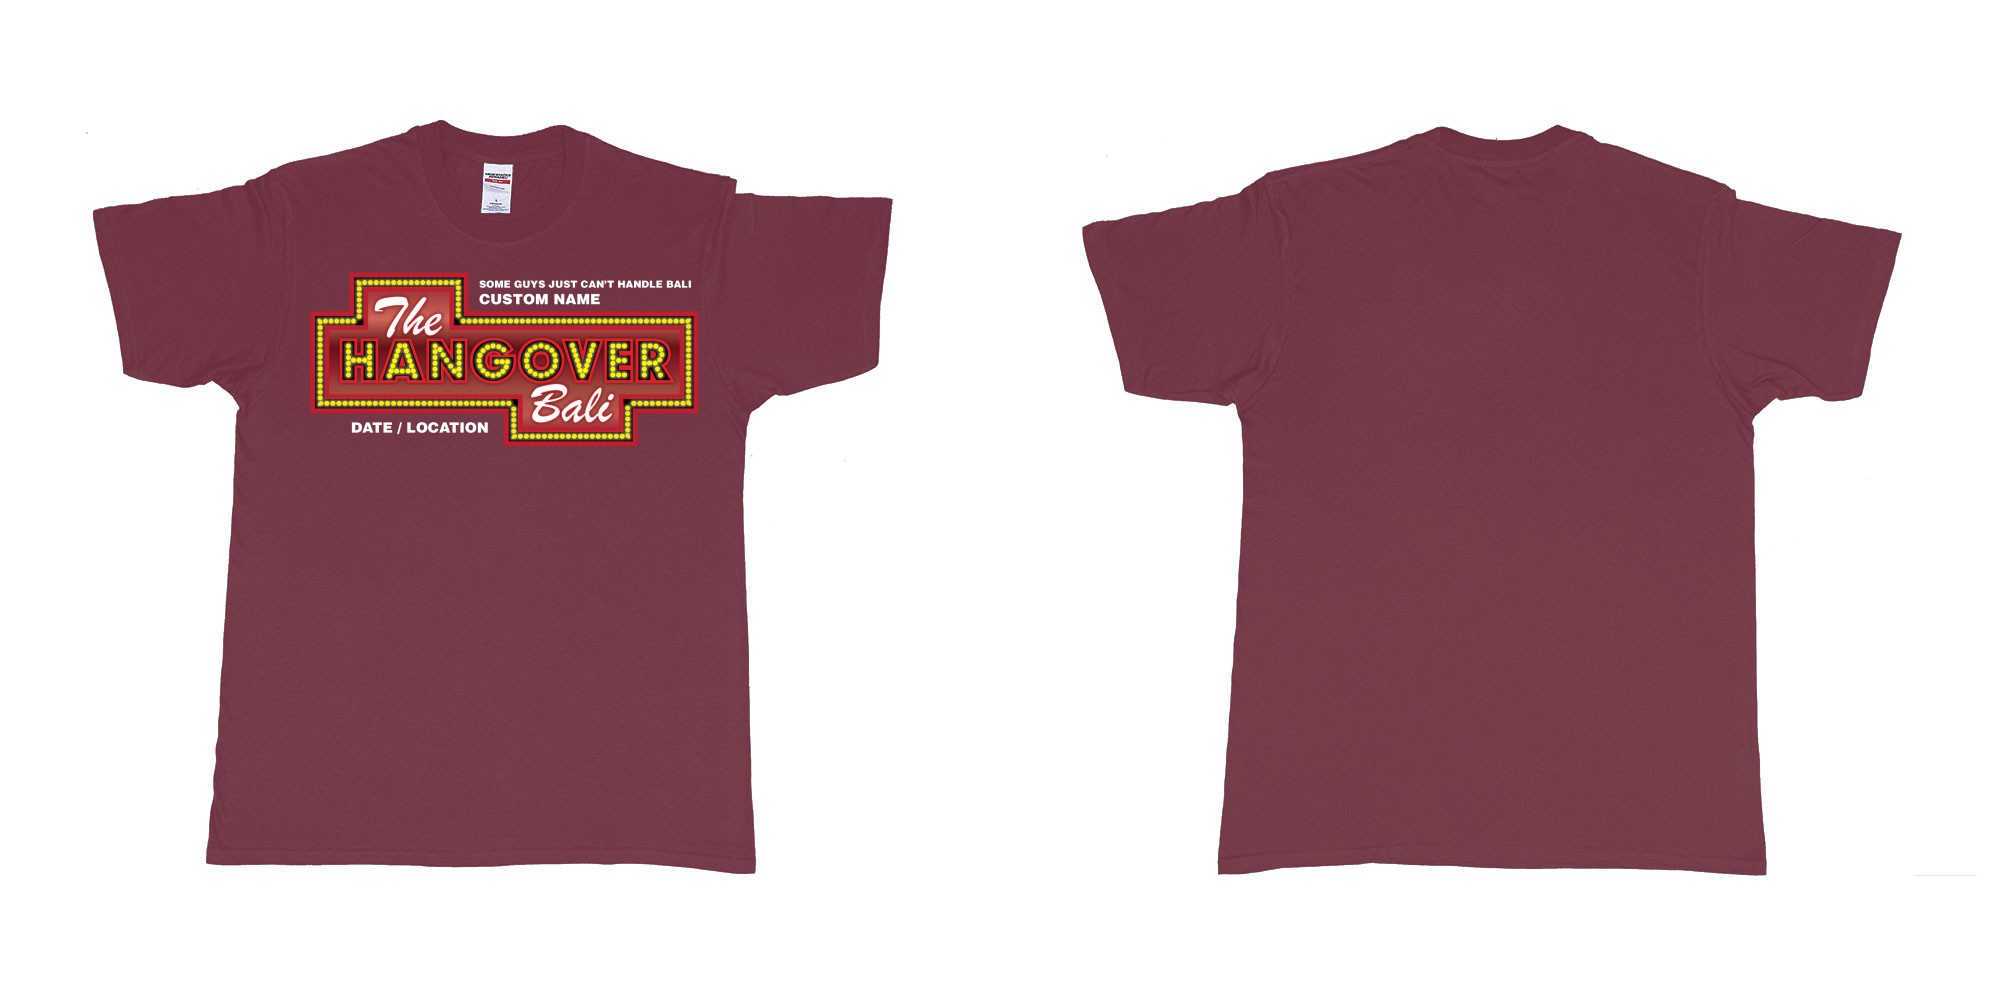 Custom tshirt design the hangover bali tour custom printing own name in fabric color marron choice your own text made in Bali by The Pirate Way